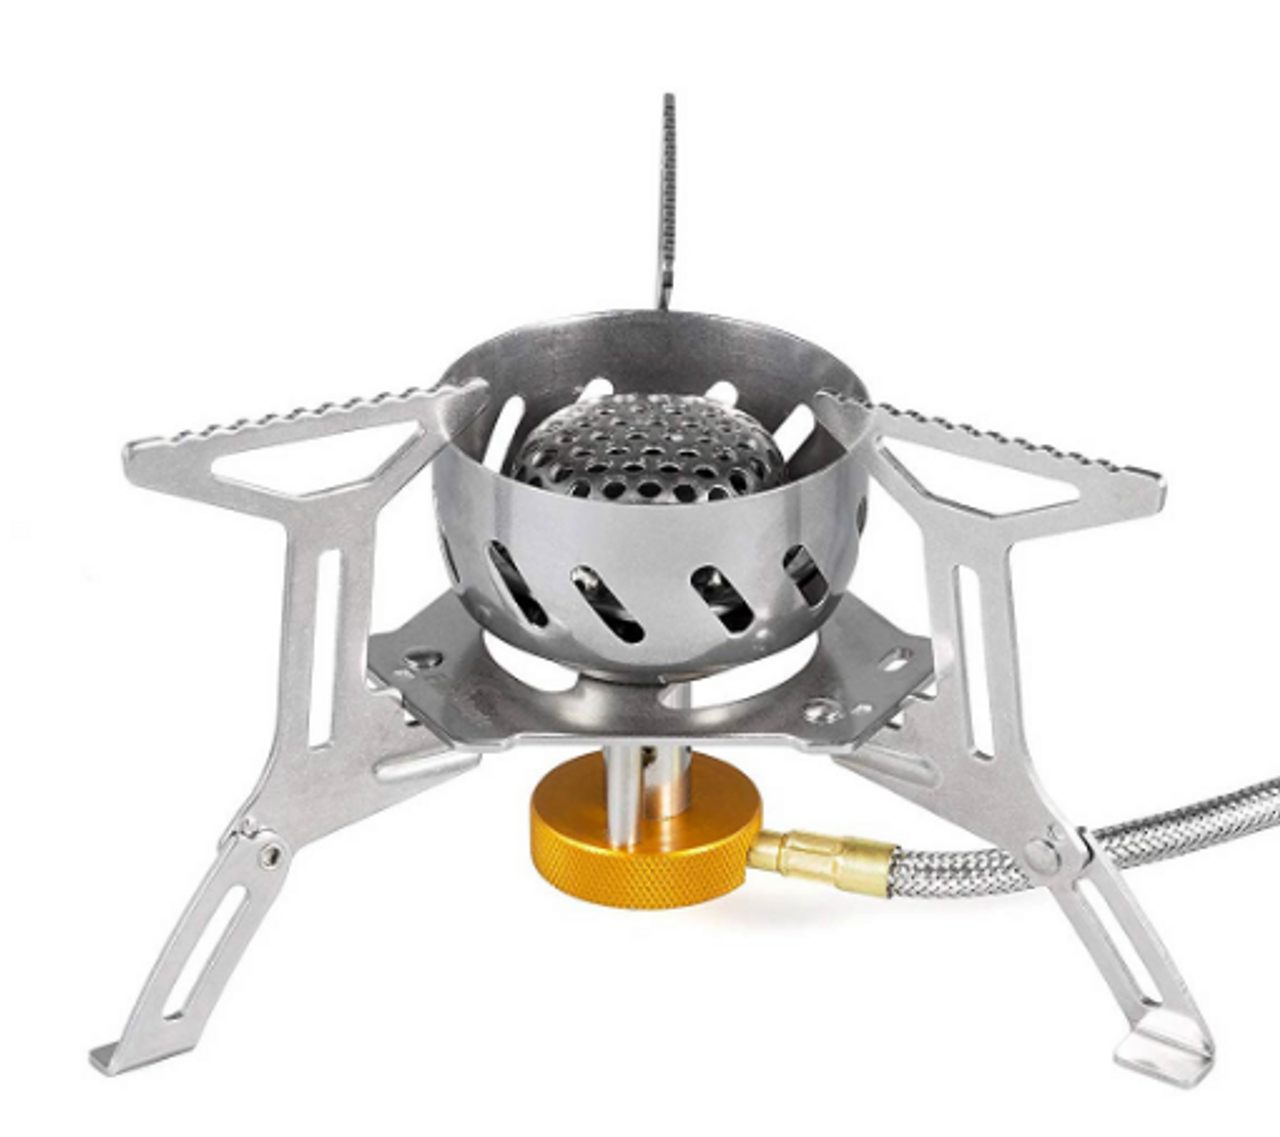 FIRE-MAPLE SPARK WIND-RESISTANT REMOTE CANISTER STOVE